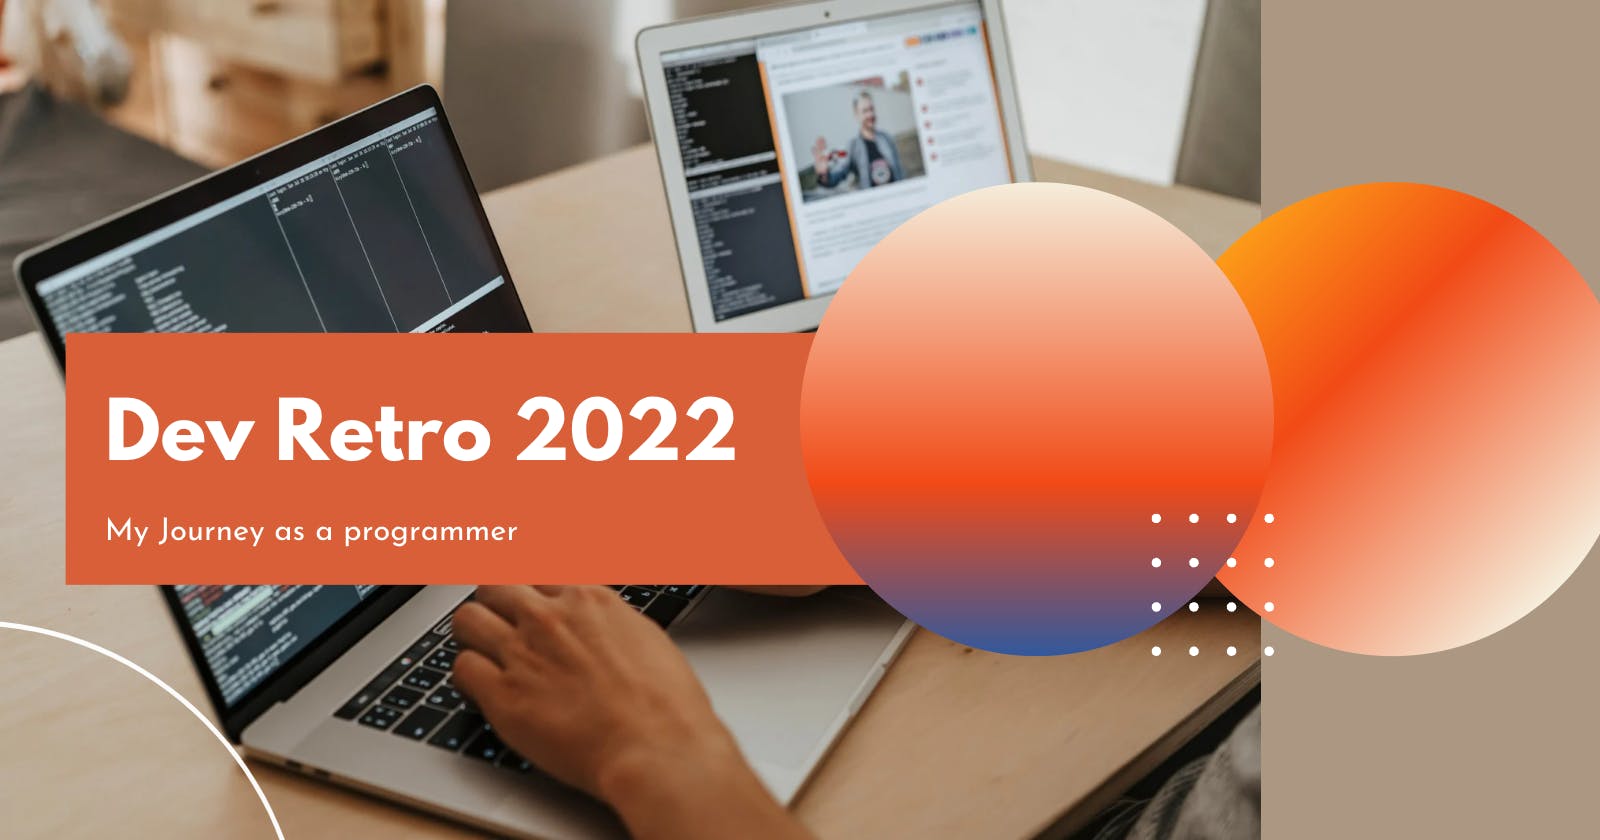 How programming helped me to learn "how to think?" - #DevRetro2022